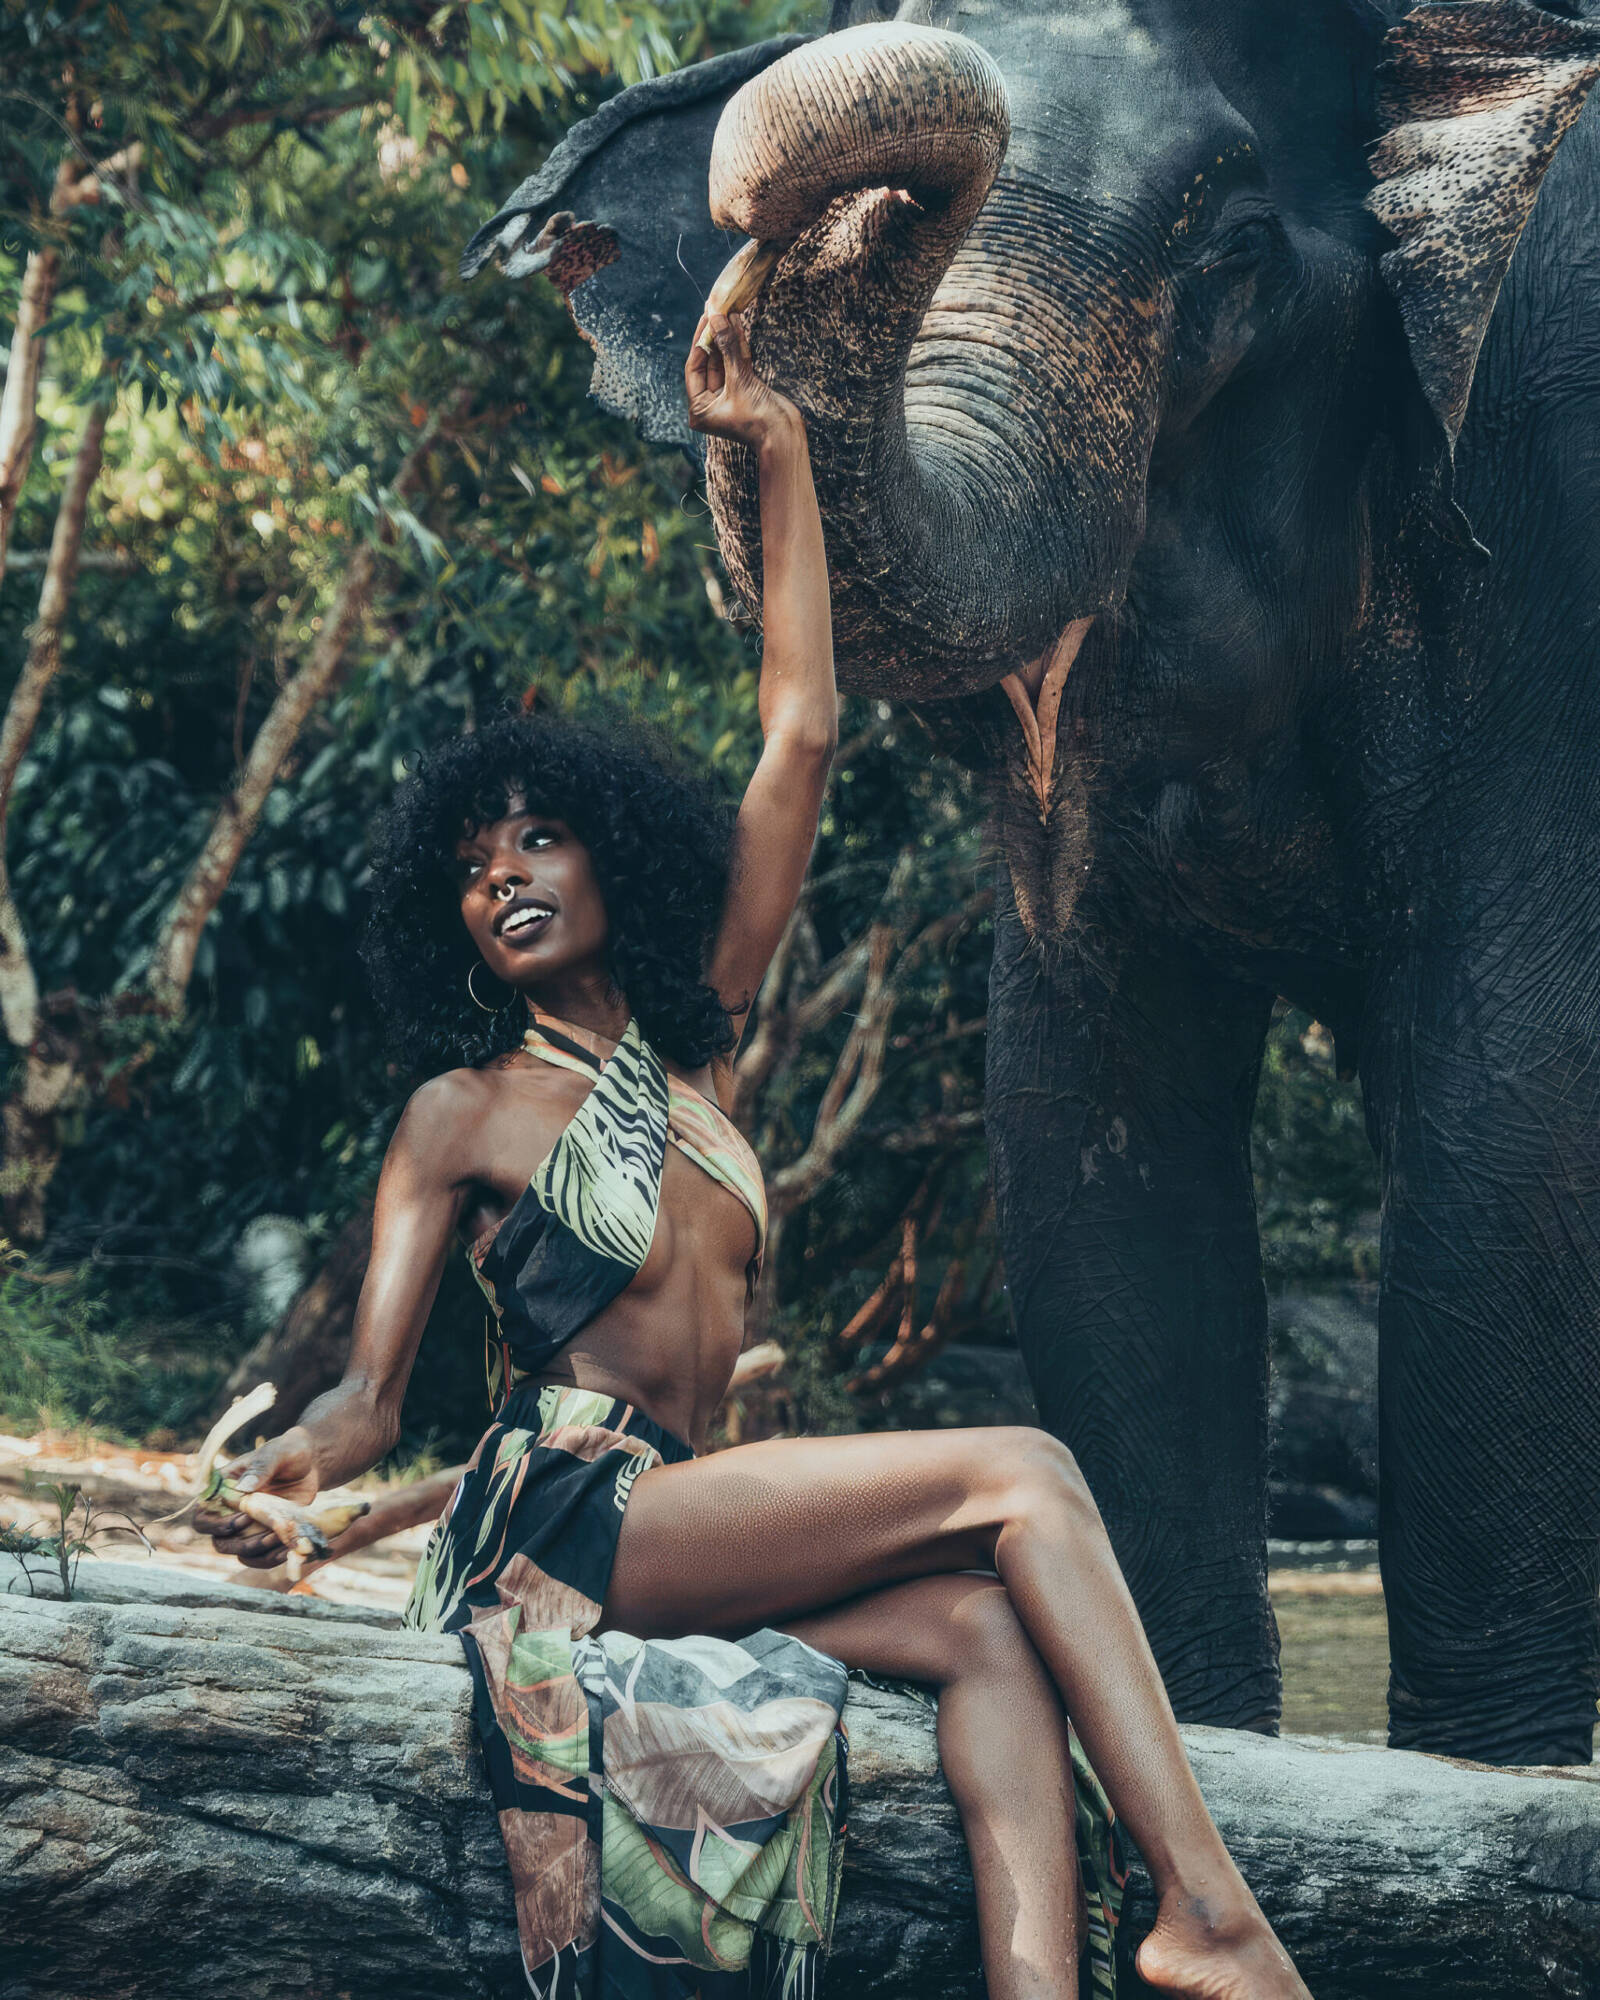 90 minute photoshoot with an elephant